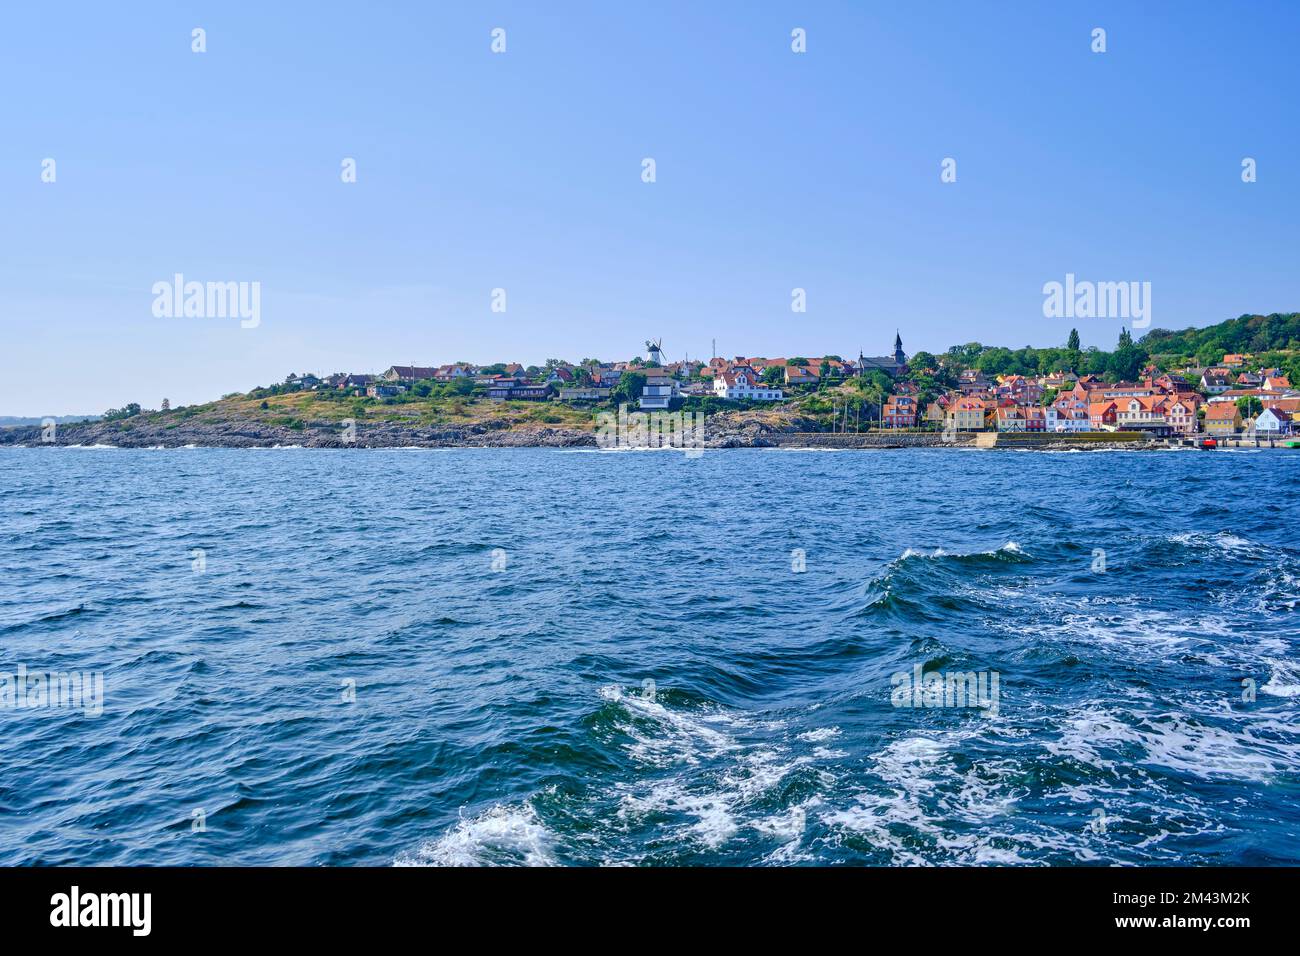 Wake behind a ship and picturesque view of the coastline of Gudhjem, Bornholm island, Denmark. Stock Photo